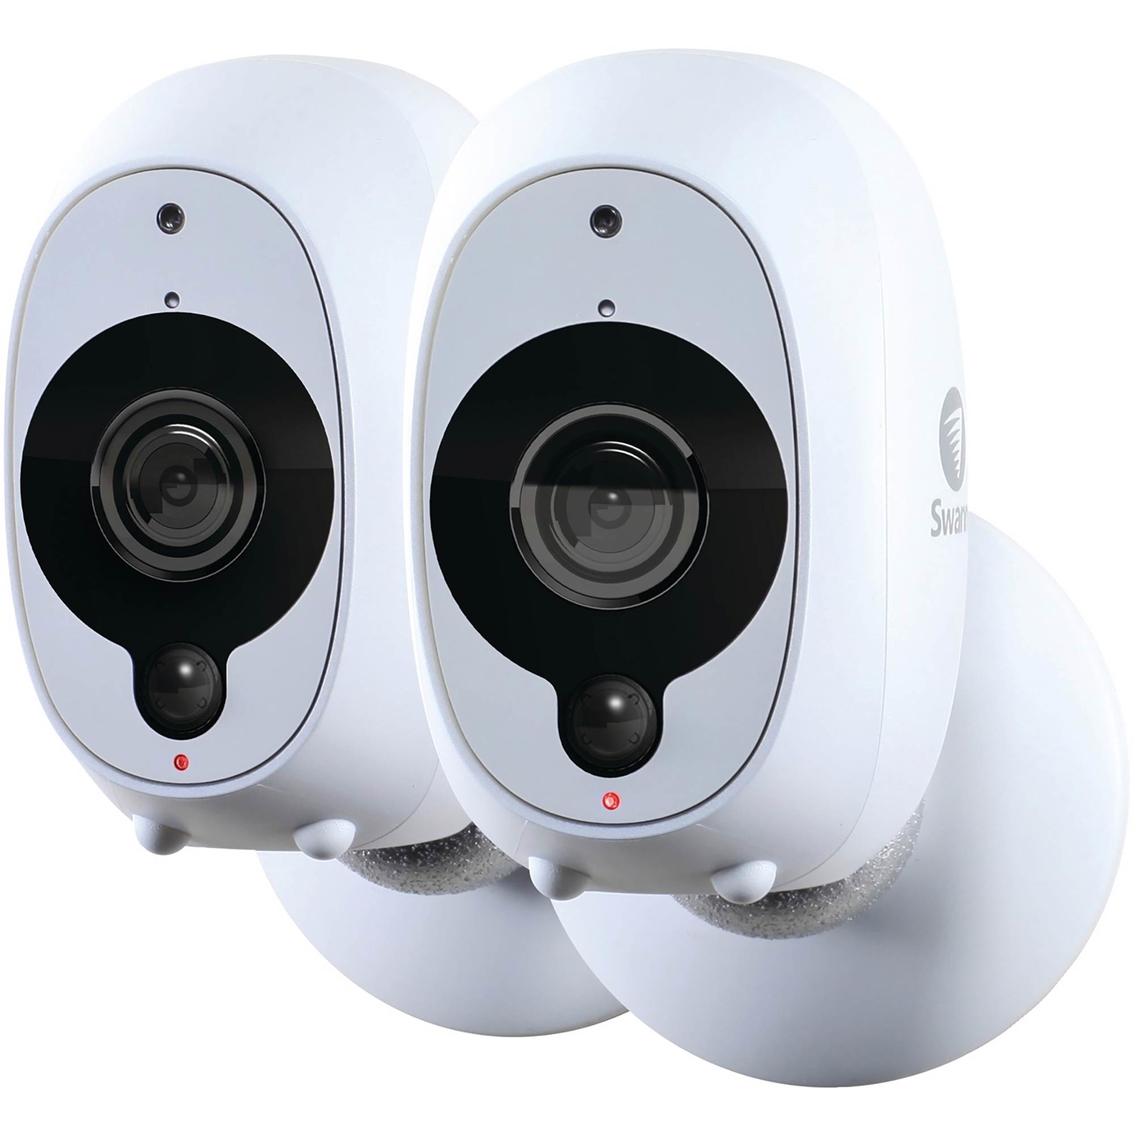 Swann 1080p Full HD Battery-Powered Wire-Free Camera 2pk. - Image 2 of 4